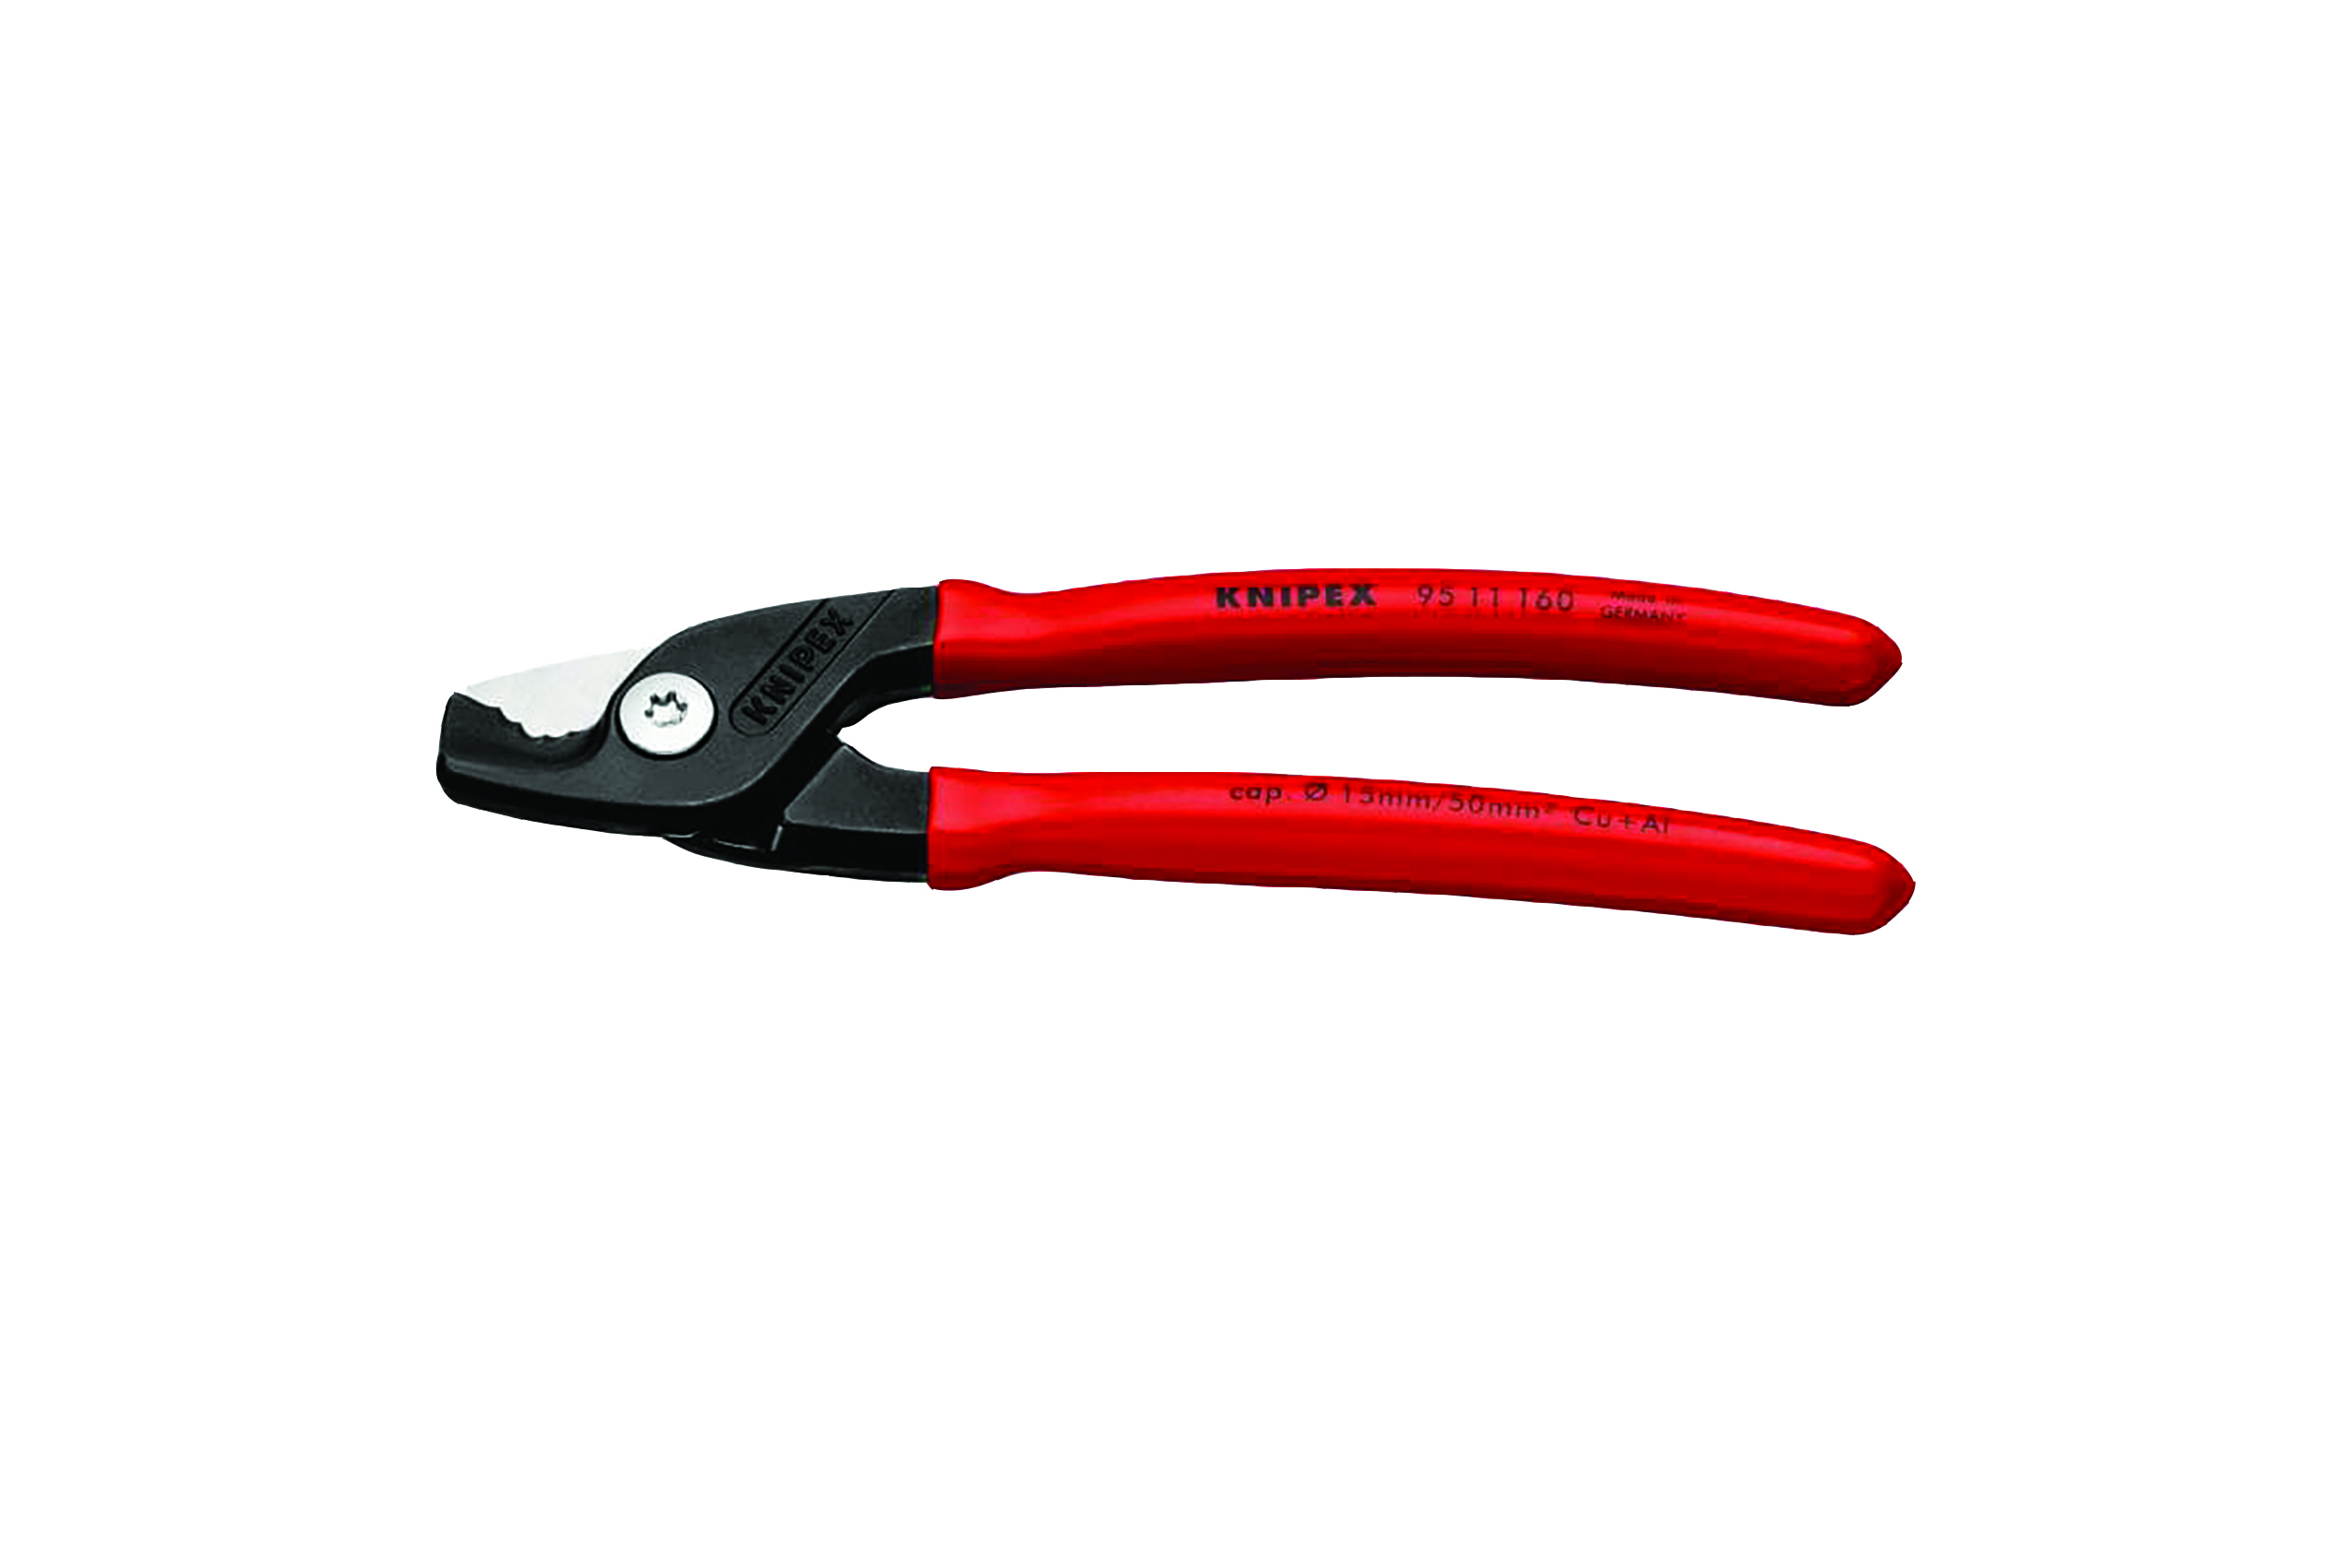 Black and red pliers labeled "Knipex." Image by Knipex.